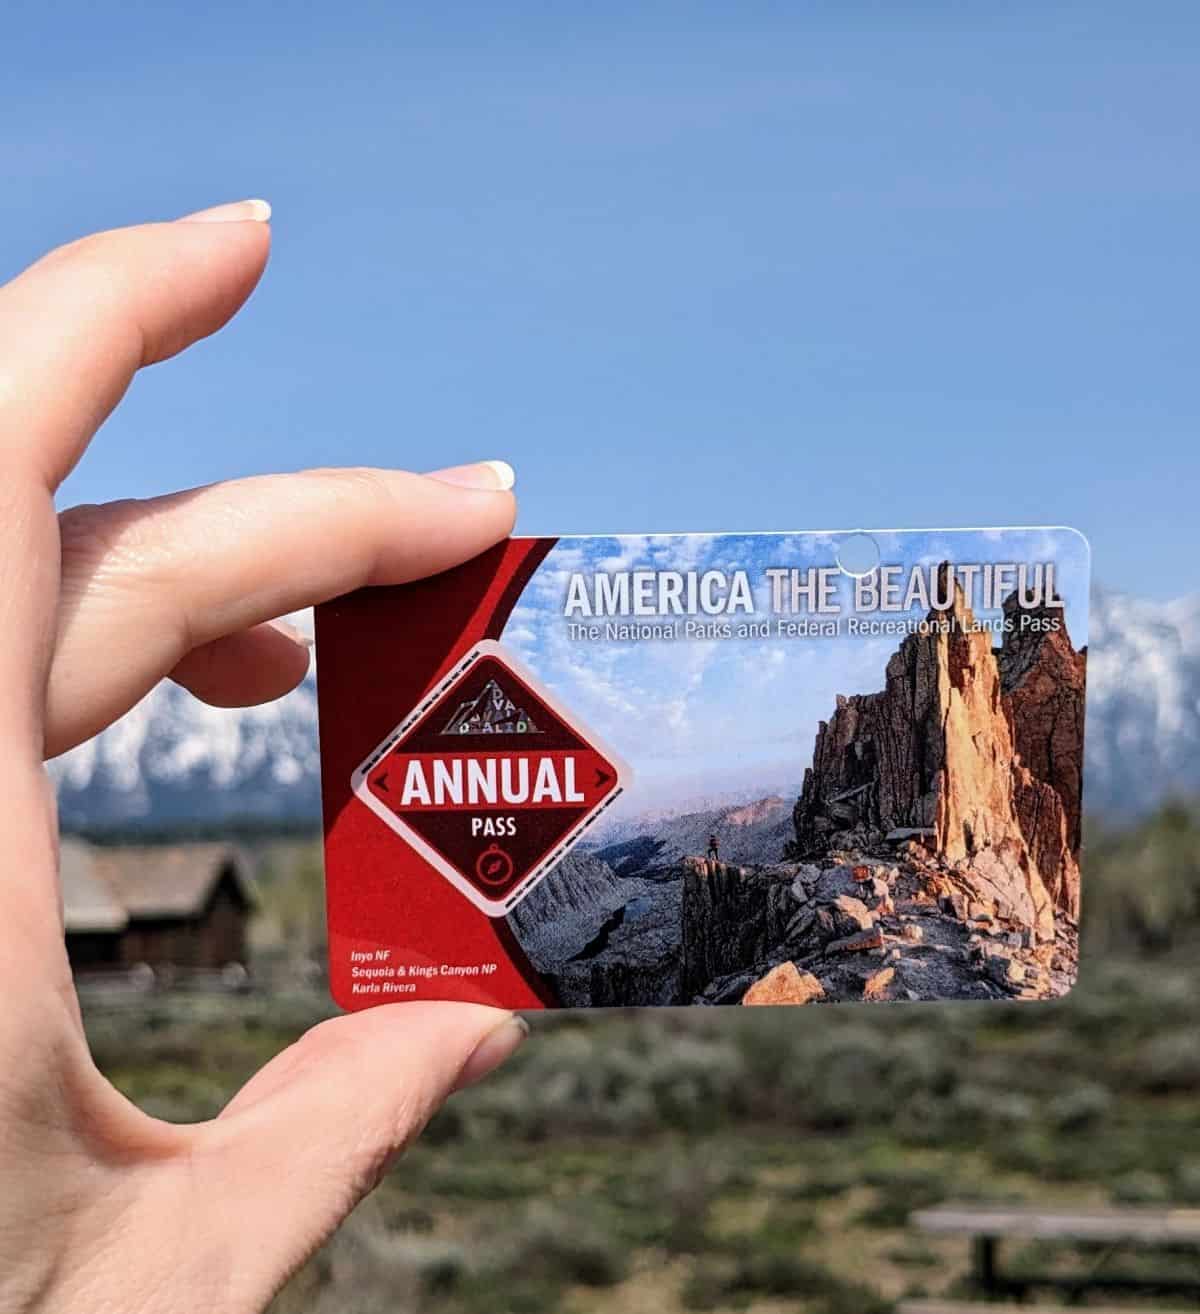 Woman's hand holding an America the Beautiful Annual pass with mountains in the background. The pass is one of the best gifts for national park lovers.